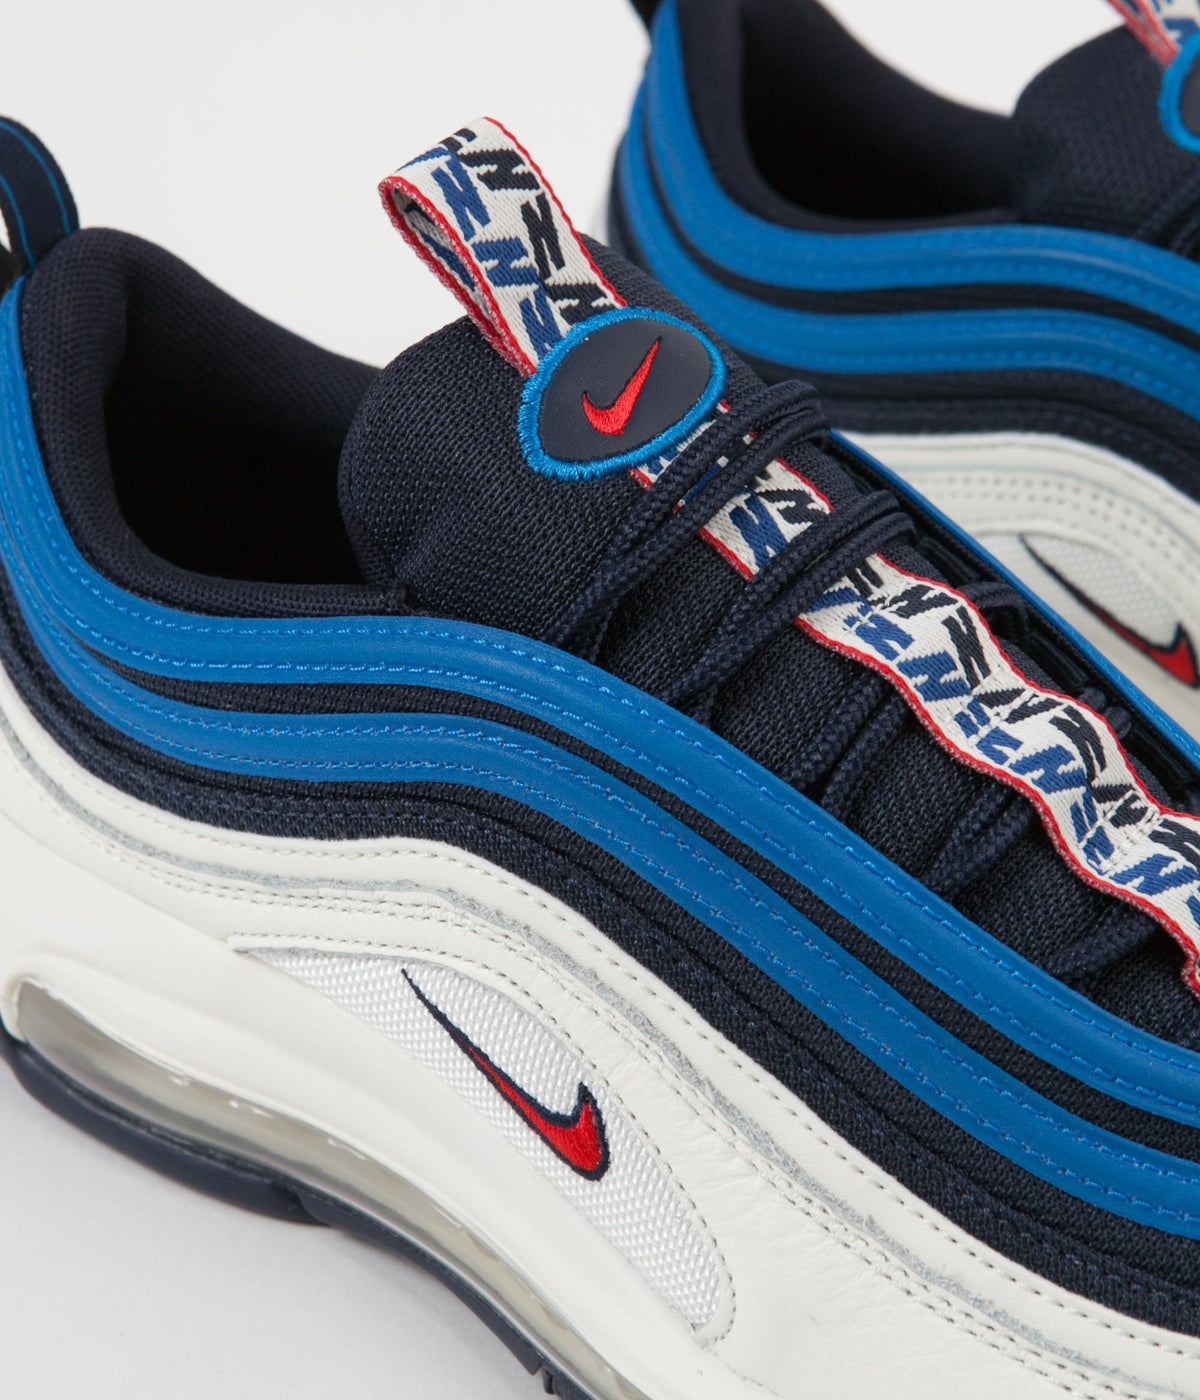 lana No puedo Vaticinador Nike Air Max 97 SE Shoes - Obsidian / University Red - Sail - Blue Neb |  Always in Colour